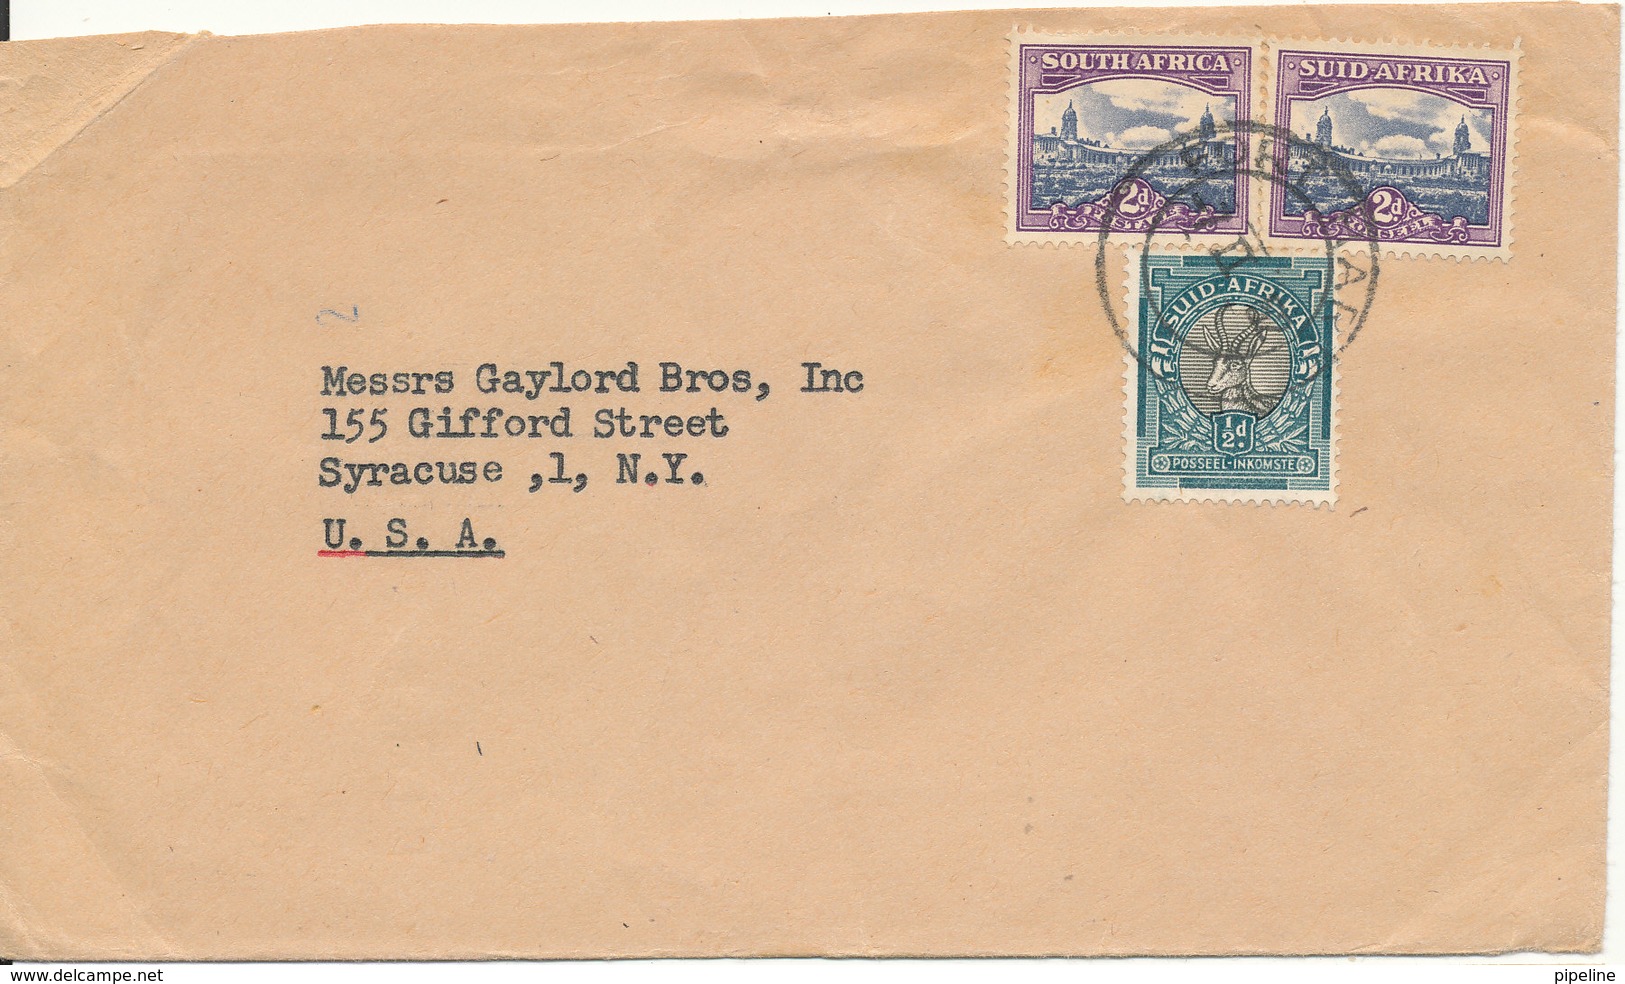 South Africa Cover Sent To USA 7-2-1952 - Covers & Documents